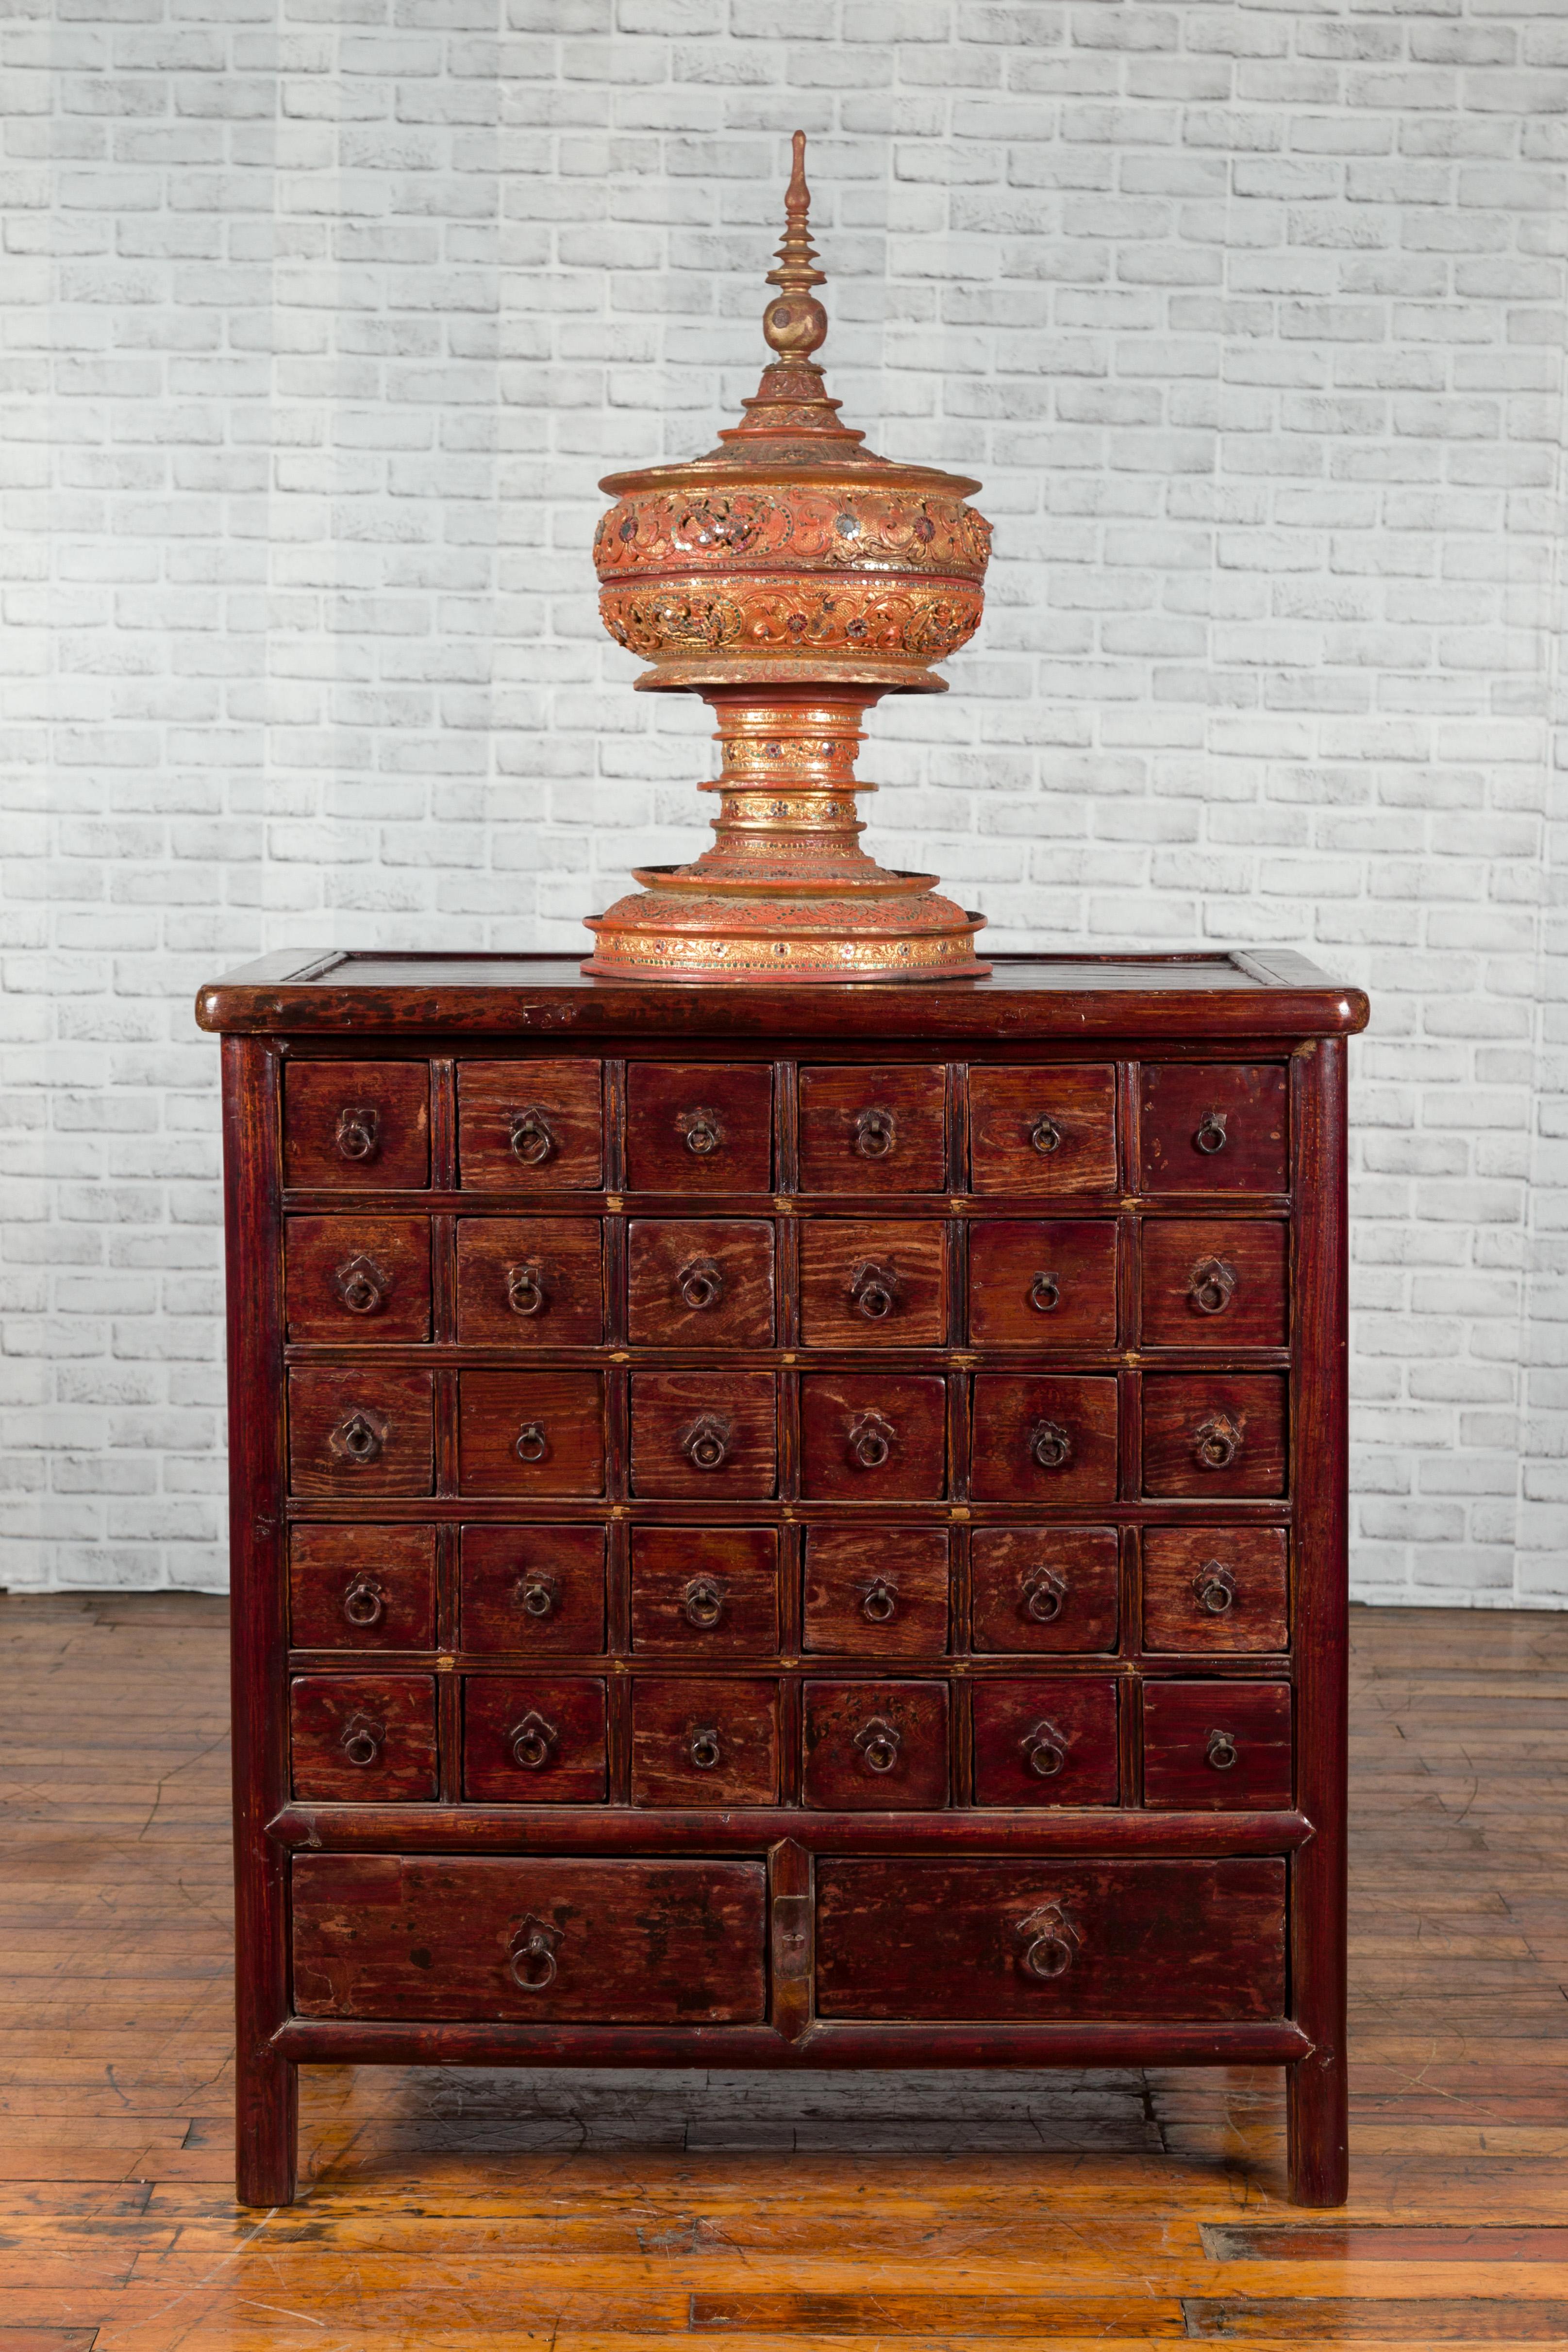 A Chinese Qing dynasty period apothecary chest from the 19th century, with 32 drawers and dark patina. Created in China during the Qing dynasty, this apothecary chest features a rectangular top sitting above 32 drawers (30 small ones resting above